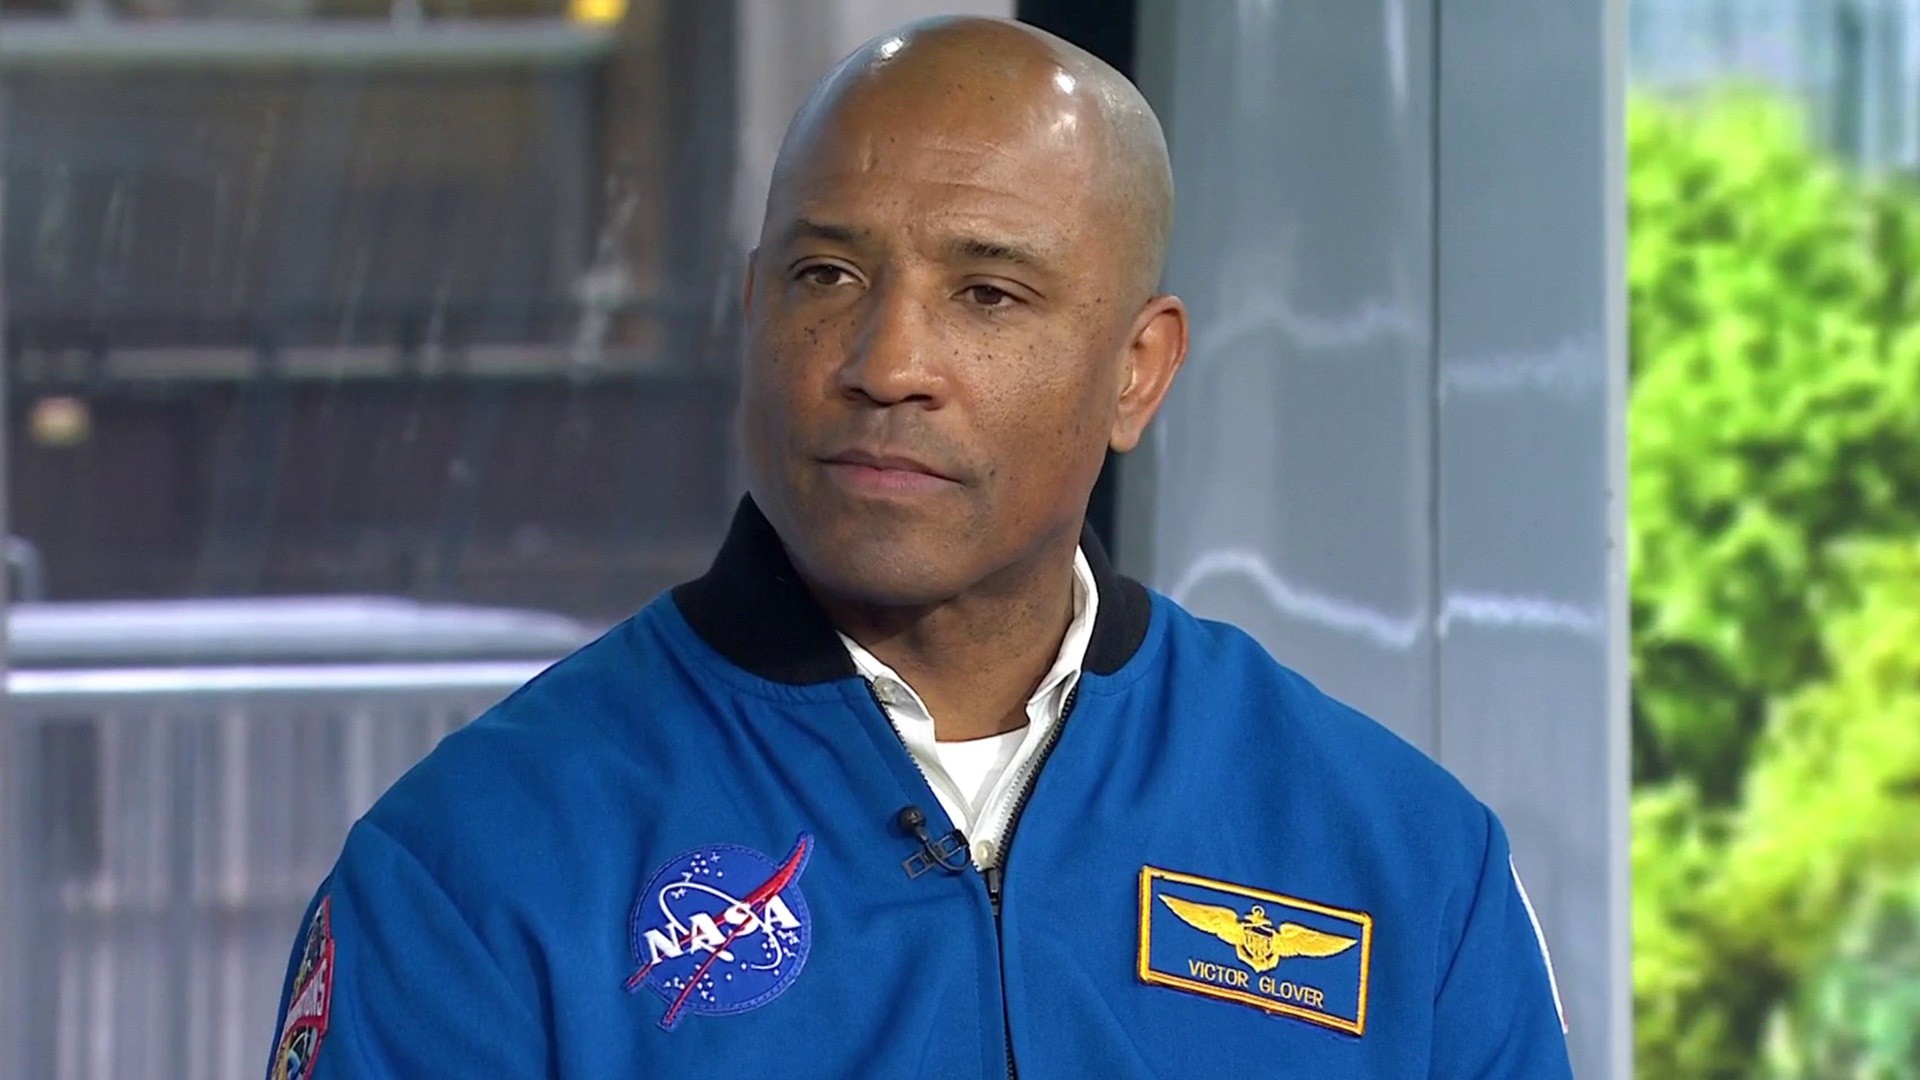 NASA astronaut details what training is like to go to space